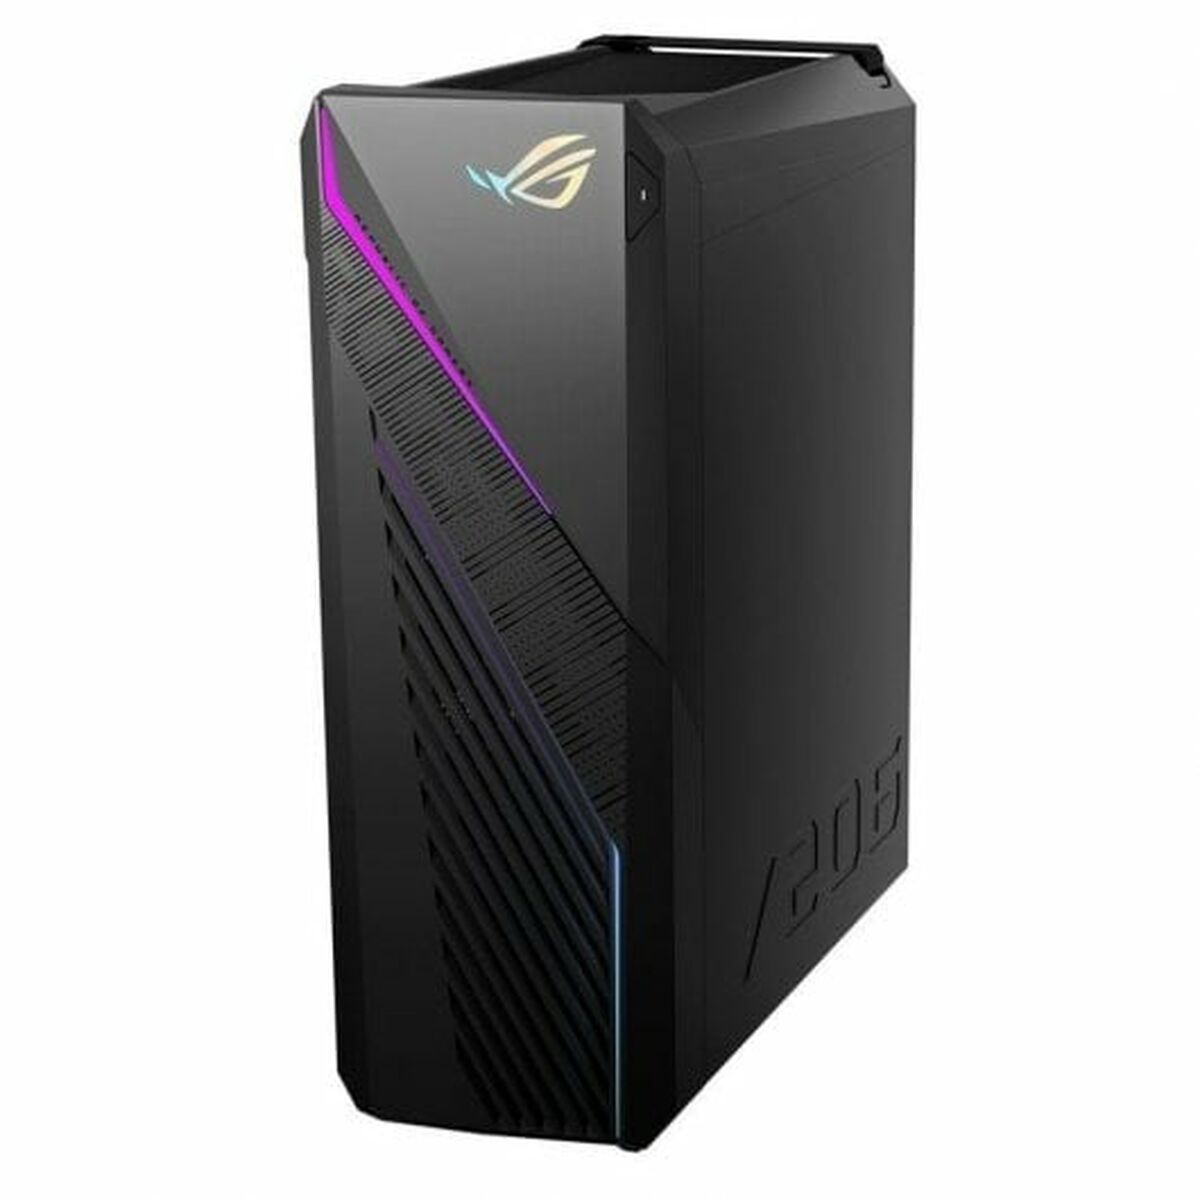 Desktop PC Asus ROG Strix G16CH Intel Core i7-13700KF 32 GB RAM 1 TB SSD NVIDIA GeForce RTX 4080, Asus, Computing, Desktops, desktop-pc-asus-rog-strix-g16ch-nvidia-nvidia-geforce-rtx-4080-intel-core-i7-13700kf-32-gb-ram-1-tb-ssd, :1 TB, :CPU, :Intel-i7, Brand_Asus, category-reference-2609, category-reference-2791, category-reference-2792, category-reference-t-19685, category-reference-t-19903, computers / components, Condition_NEW, office, Price_+ 1000, Teleworking, RiotNook